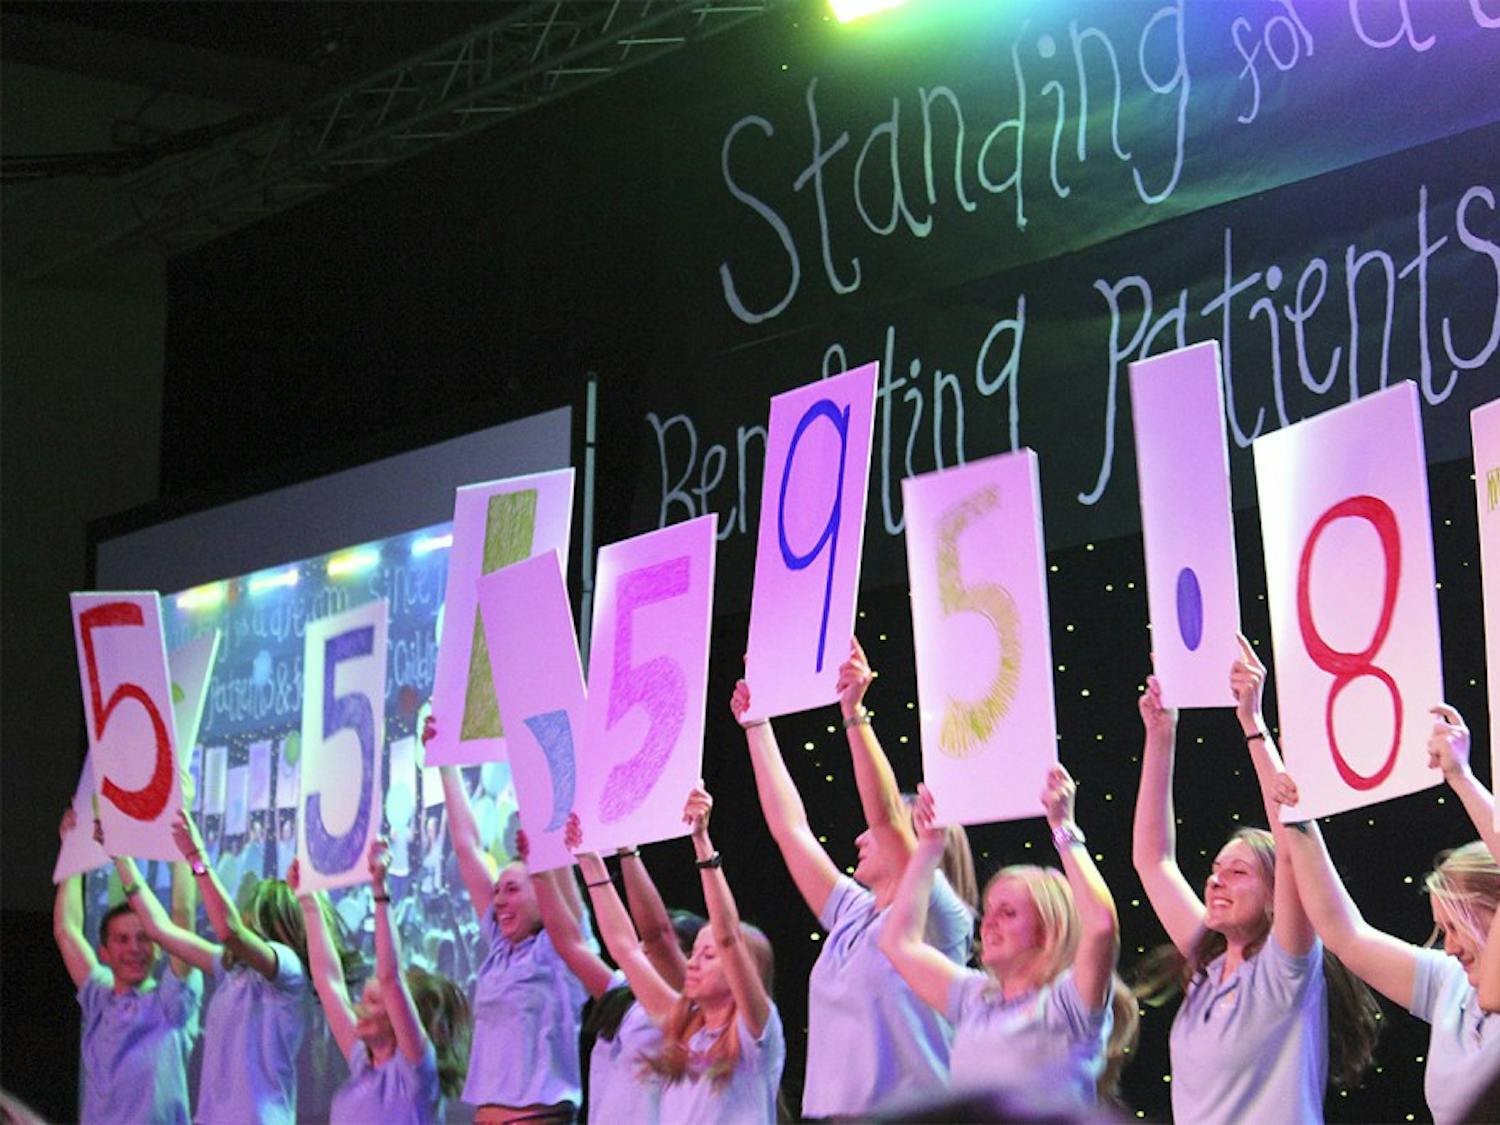 UNC's annual 24-hour standing and dancing Dance Marathon took place on March 21 and 22. The organization ended up raising 551, 595.87 dollars for the patients and families at UNC's Childrens Hospital, passing the half a million mark for the first time in history. 